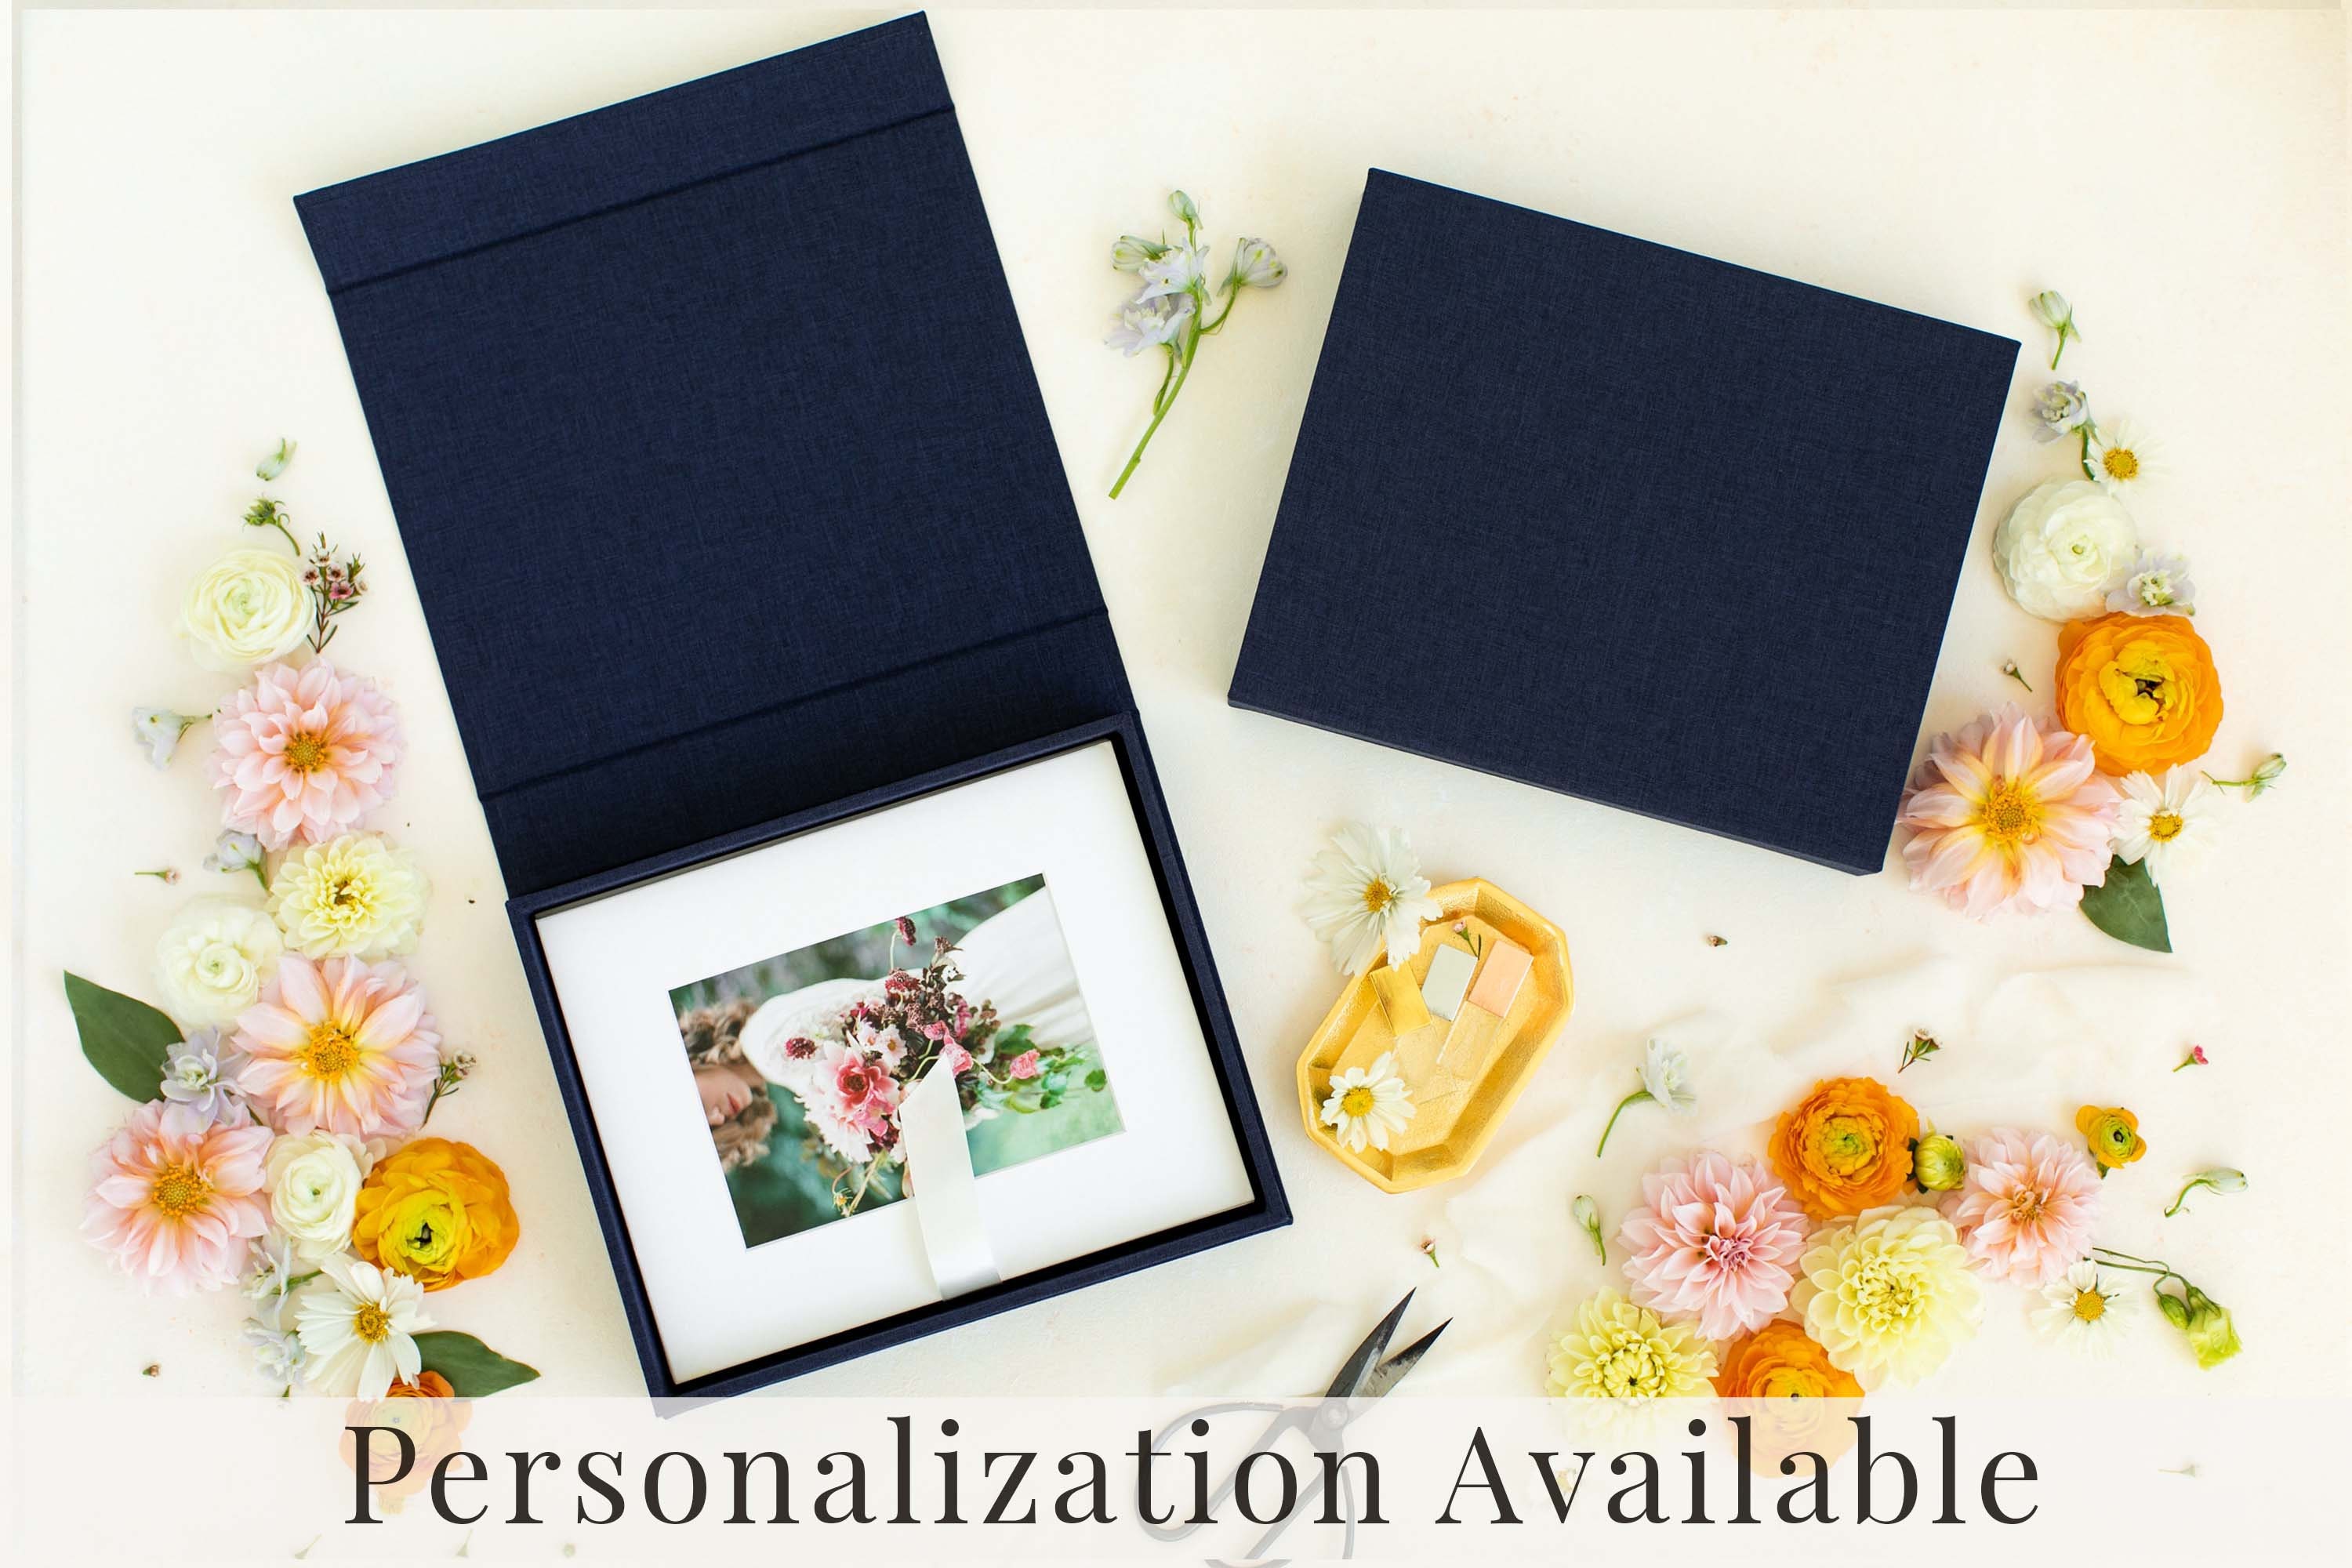  Pssoss Photo Album 8x10 with Writing Space Linen Cover 8x10  Photo Album Book Holds 30 Photos Ideal for Wedding Theme-Album and Baby  Photo Albums (Black,30 Pockets) : Home & Kitchen